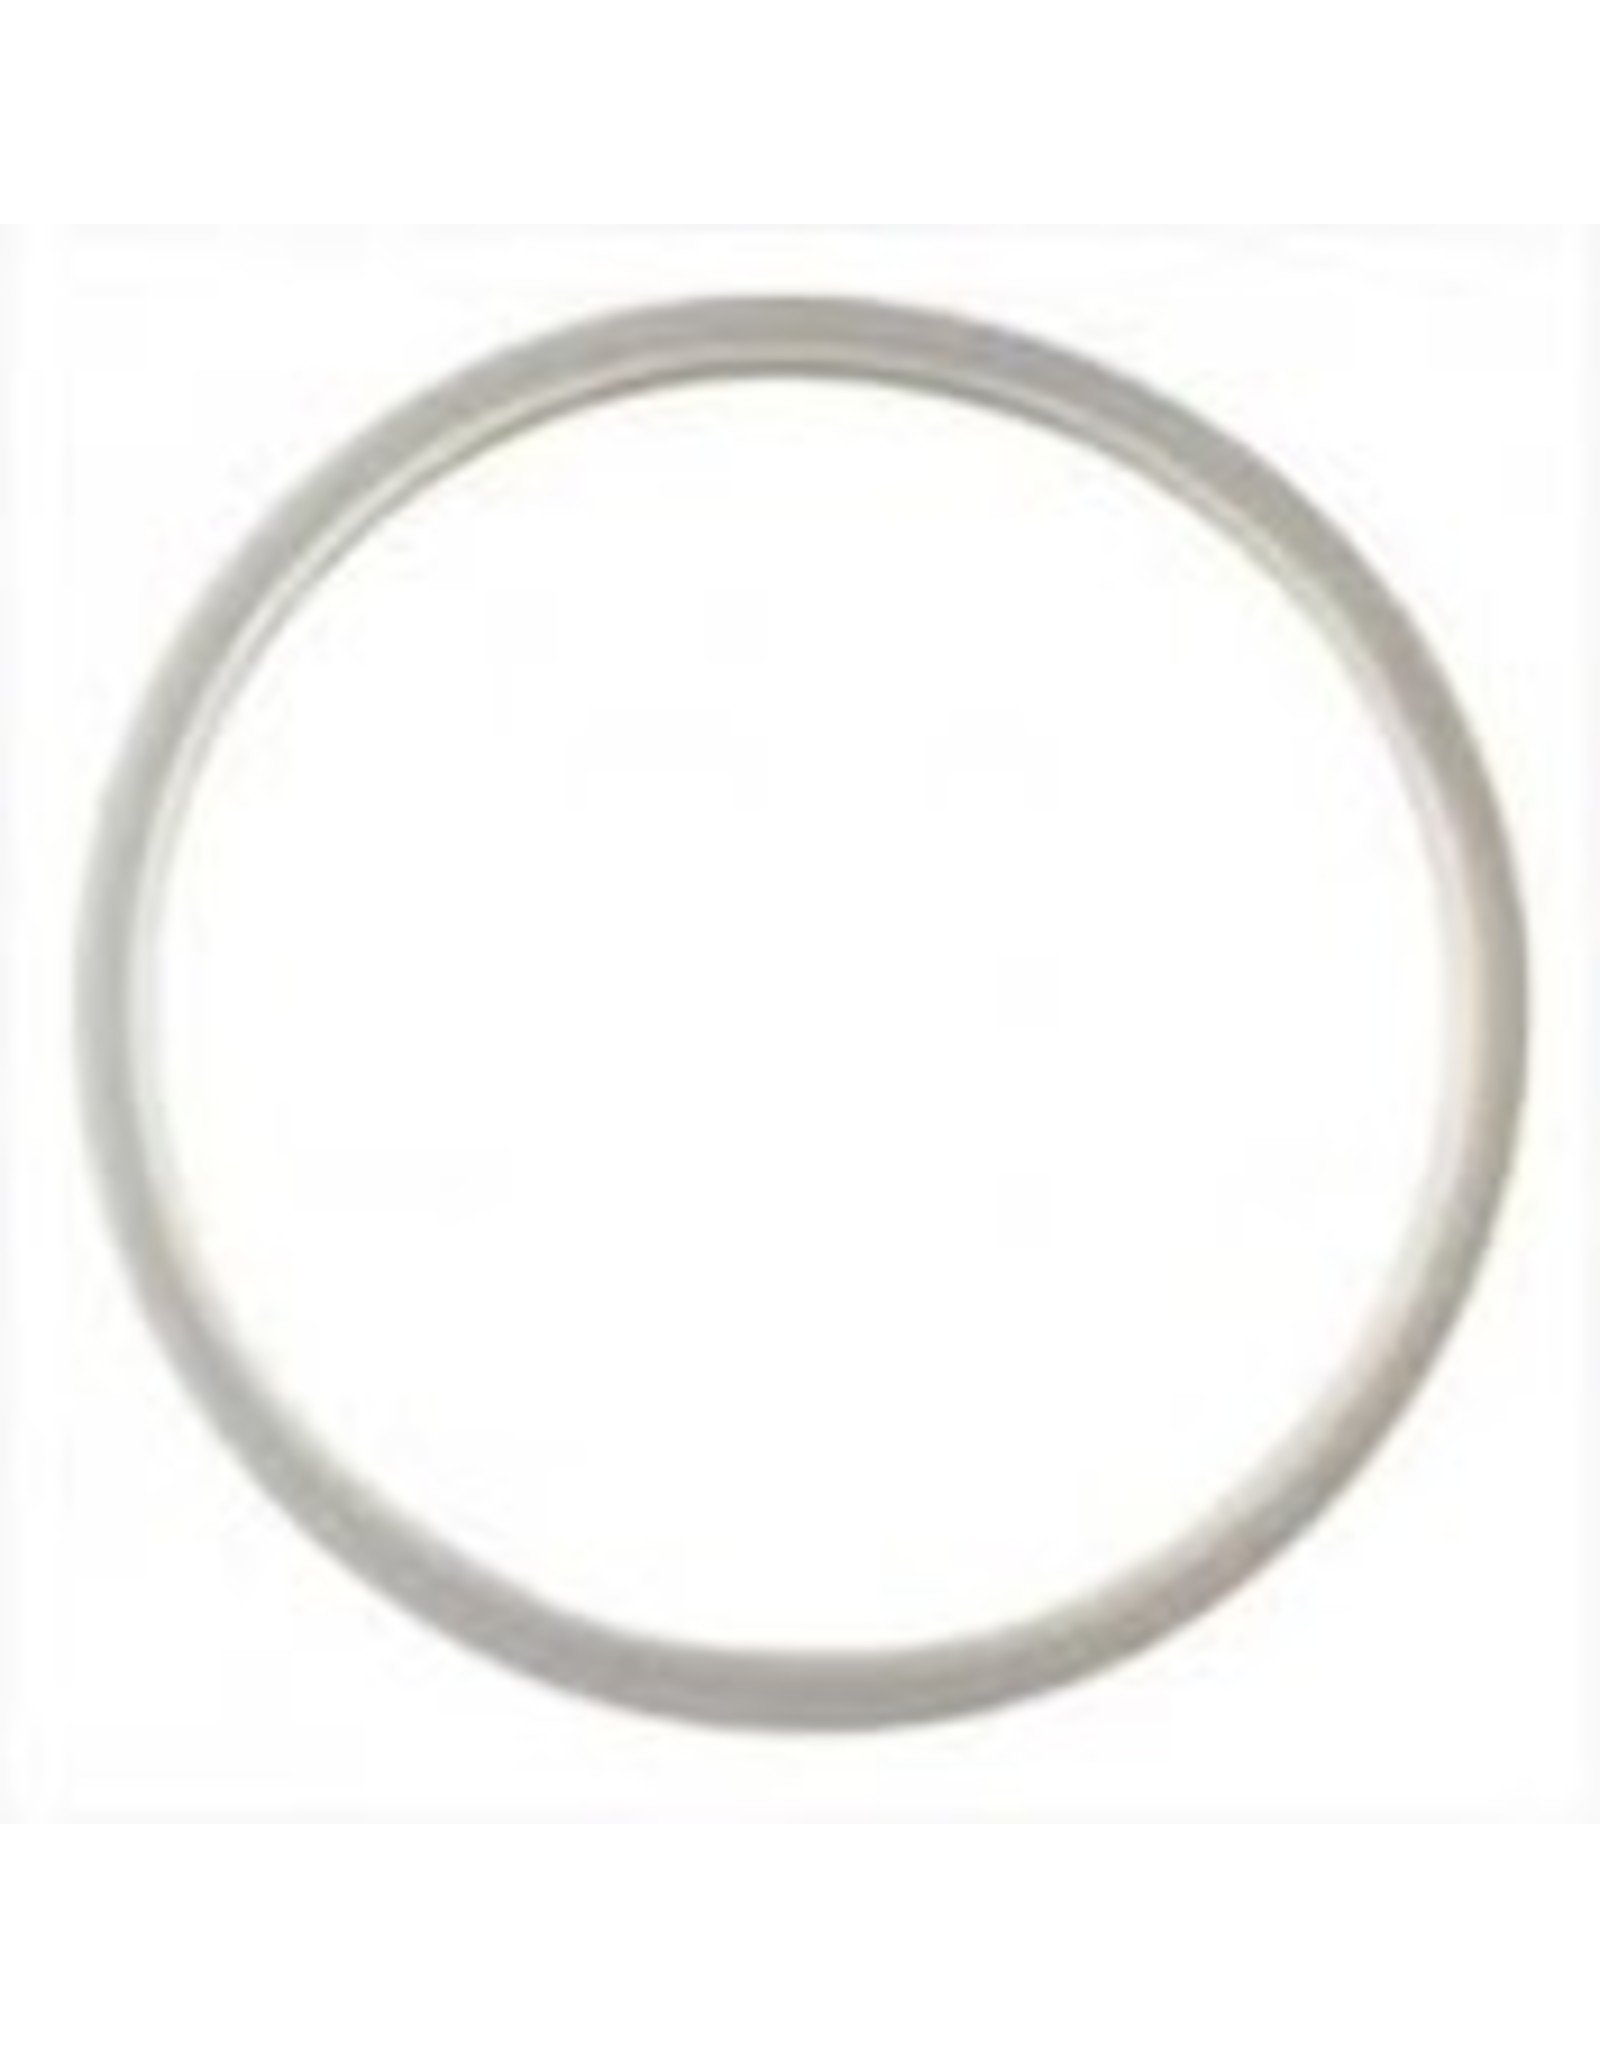 T500 FLAT SILICON O RING LID